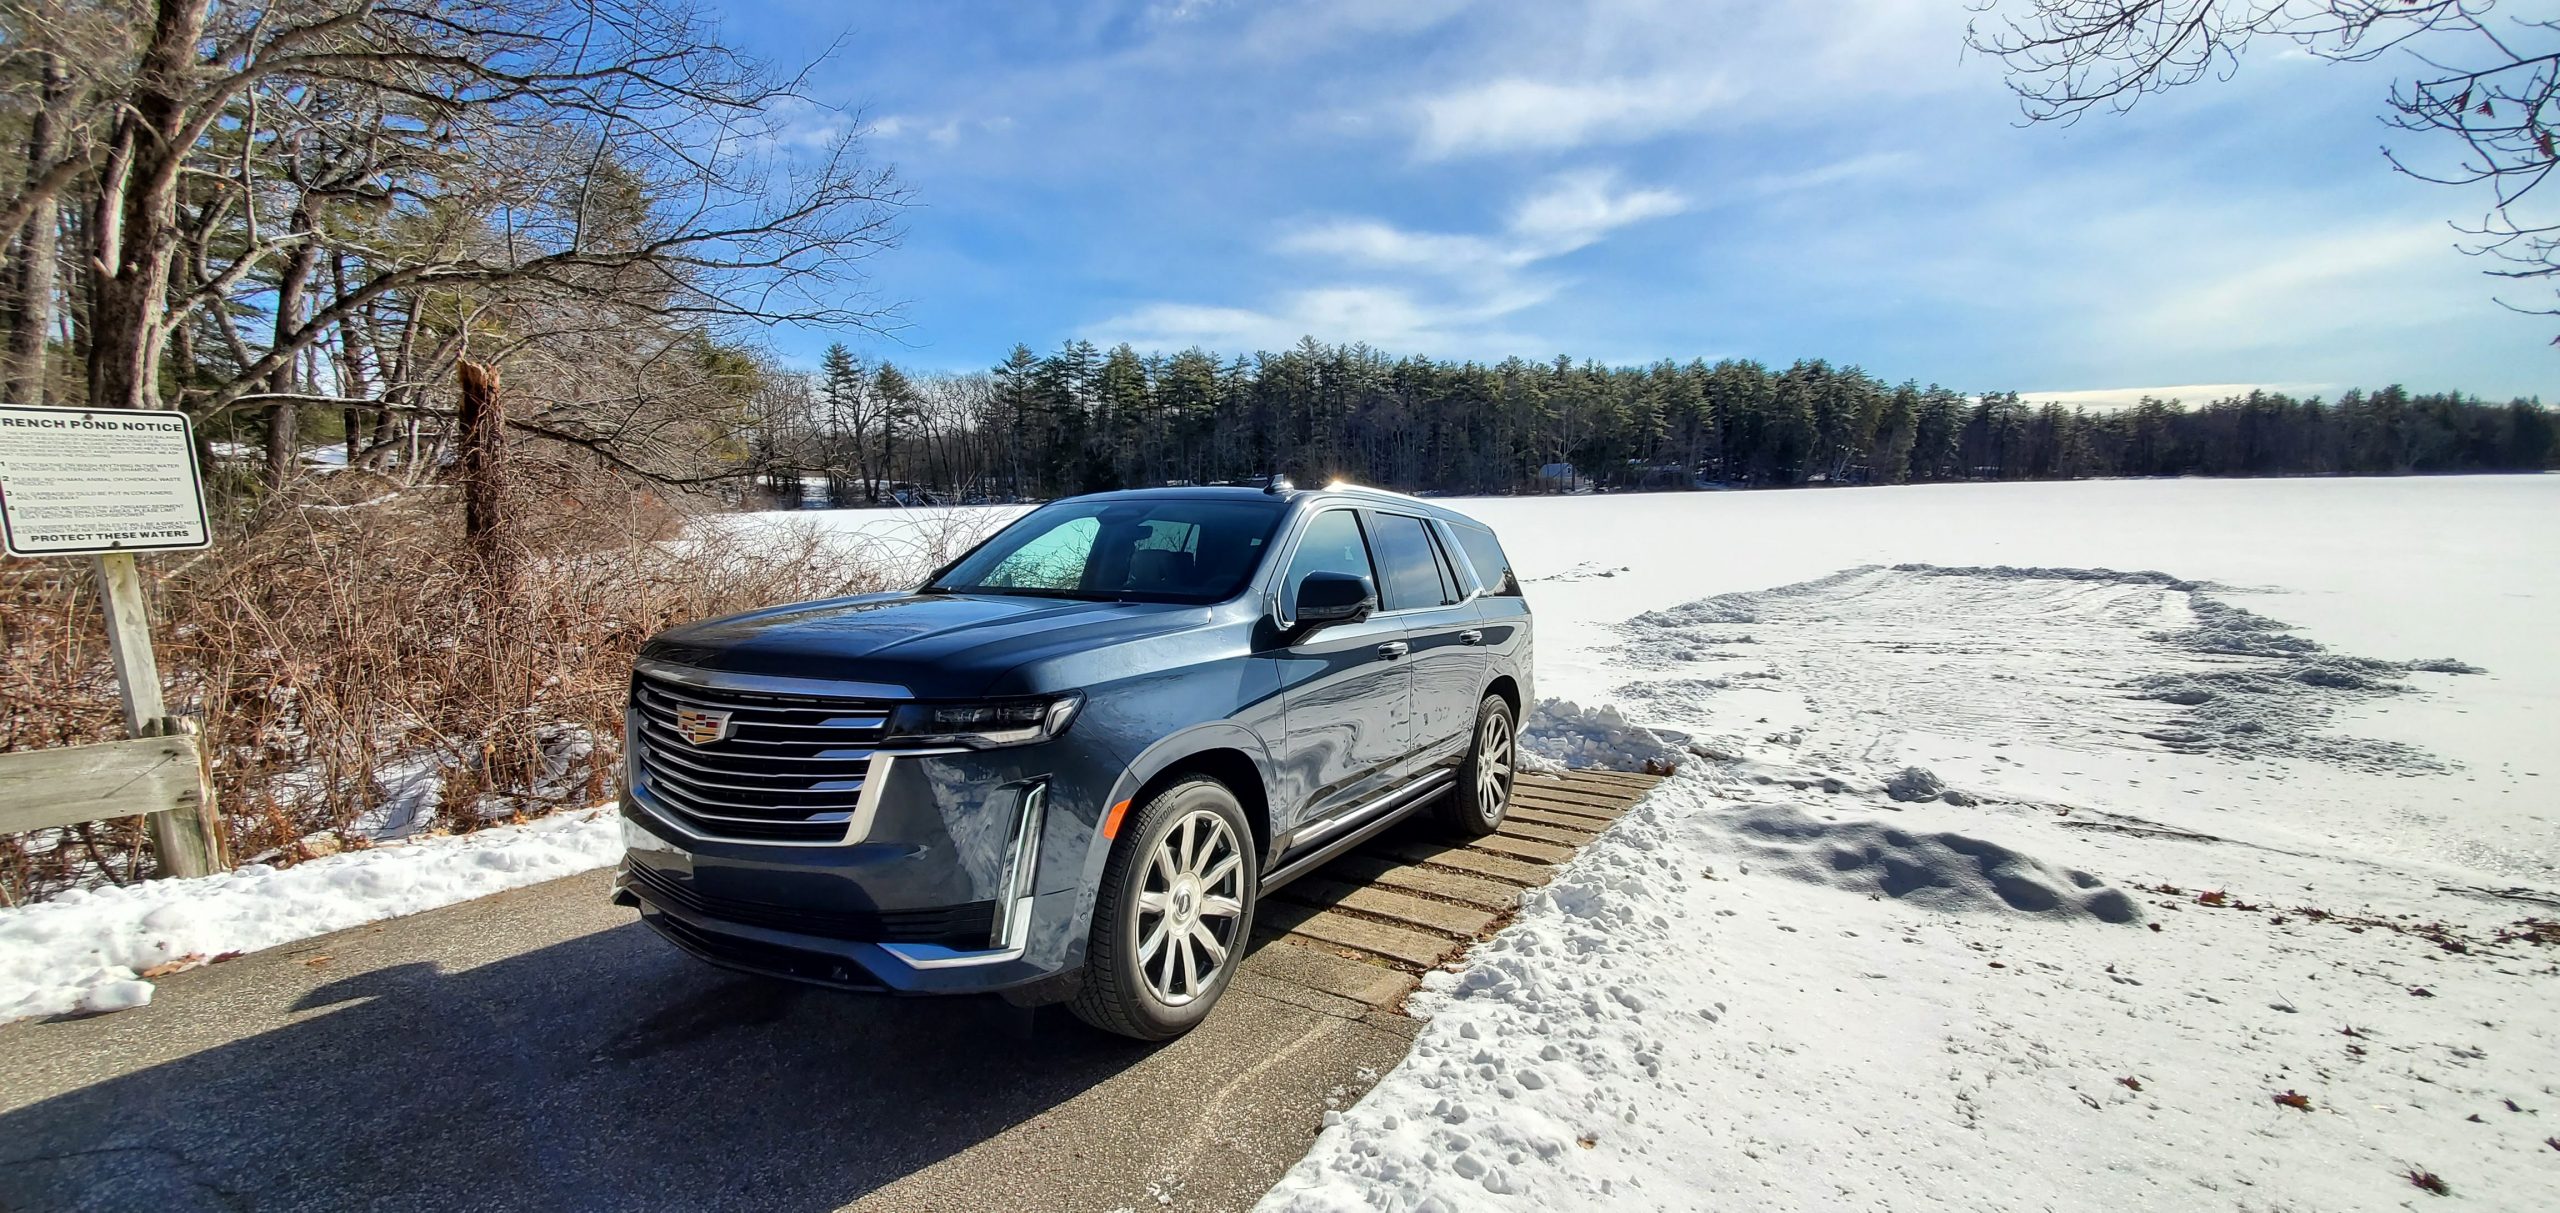 The Cadillac Escalade is among the list of vehicles that may experience poor heater performance